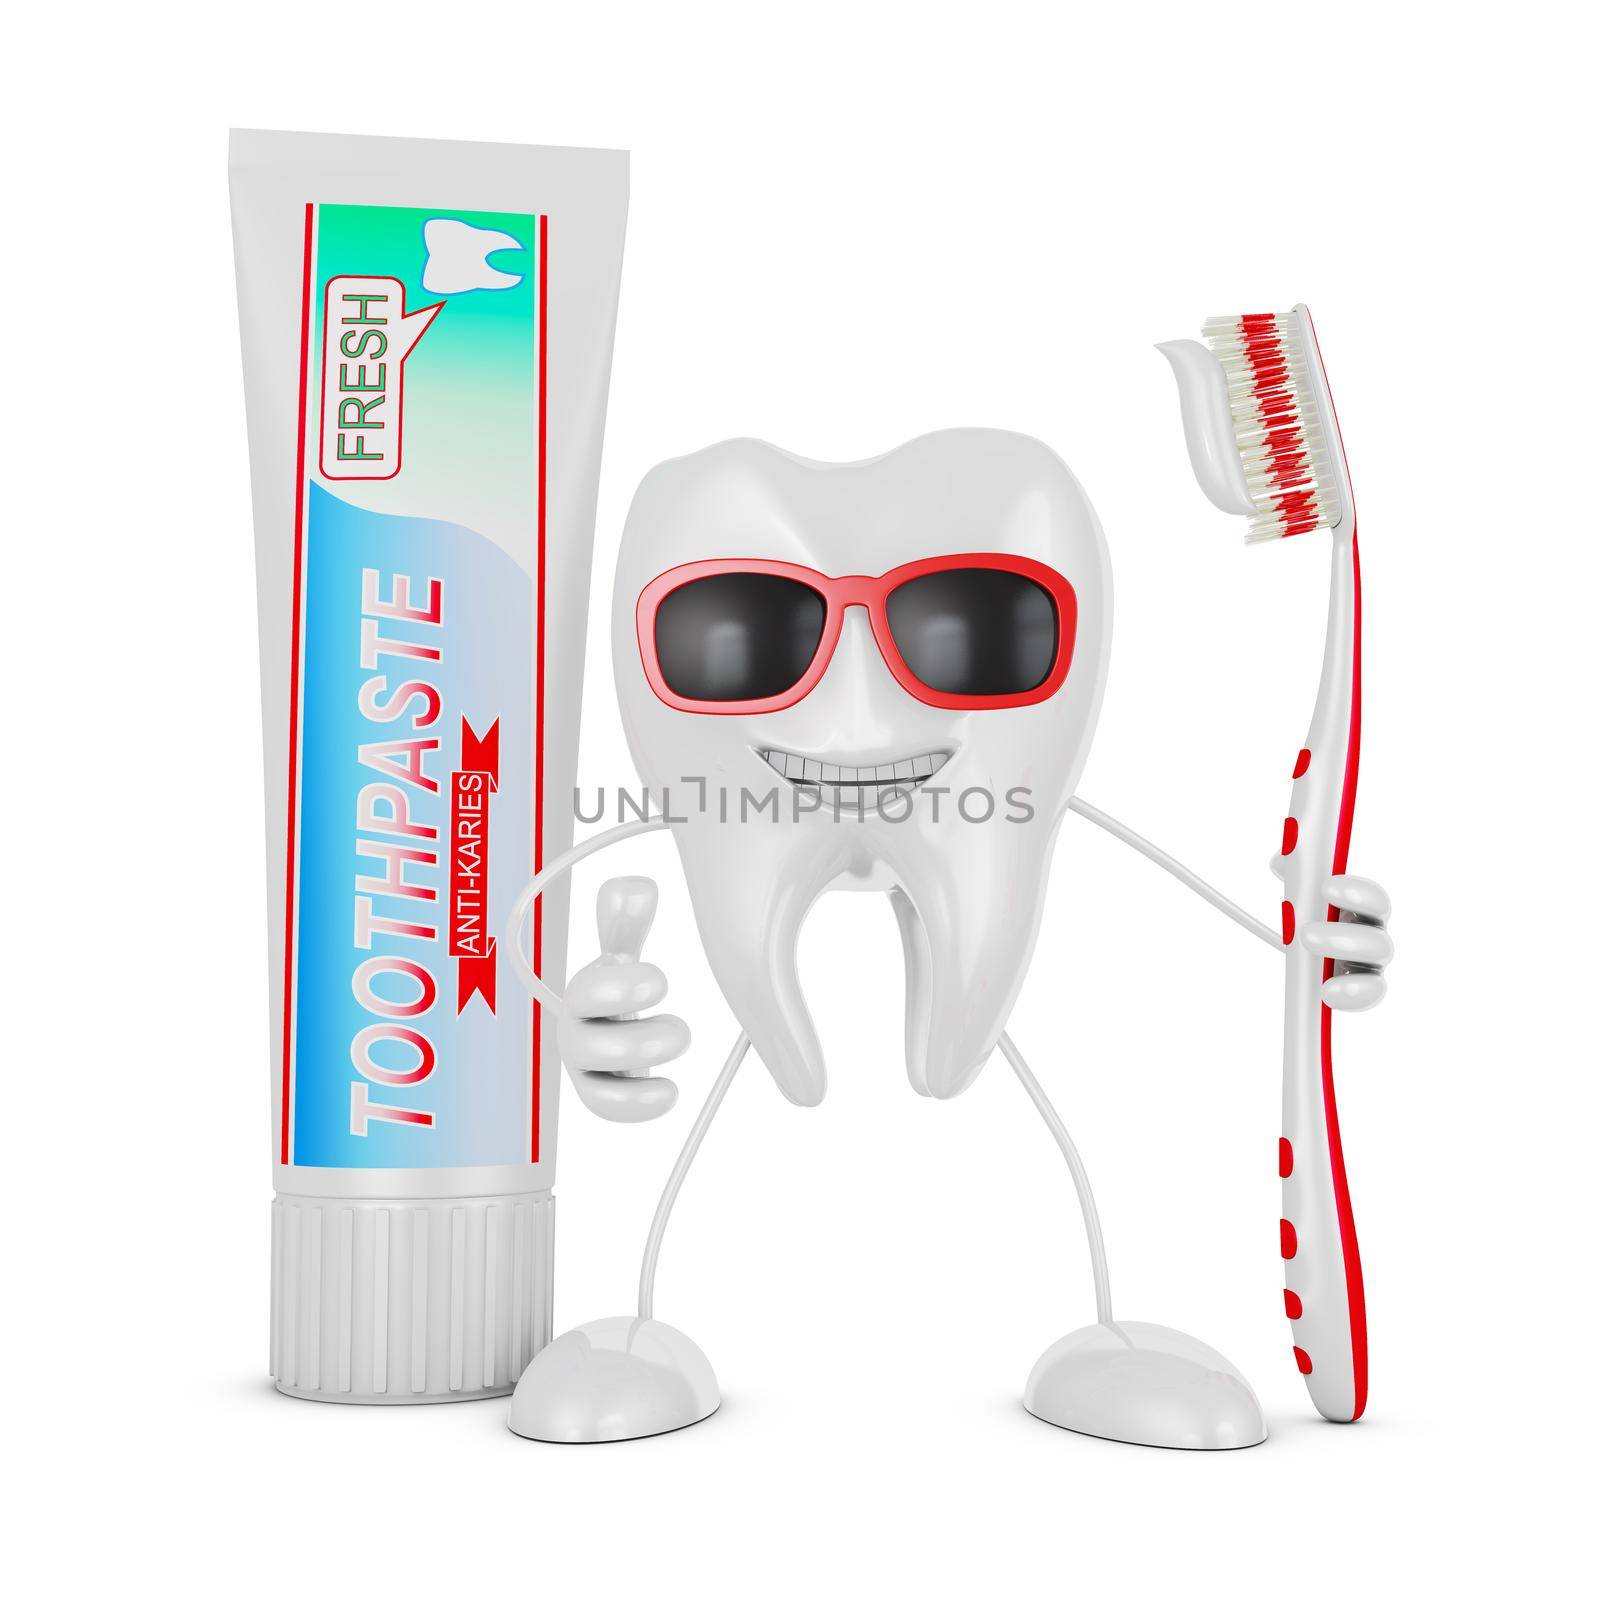 Smiling tooth with glasses holding a toothbrush near the a tube of toothpaste.